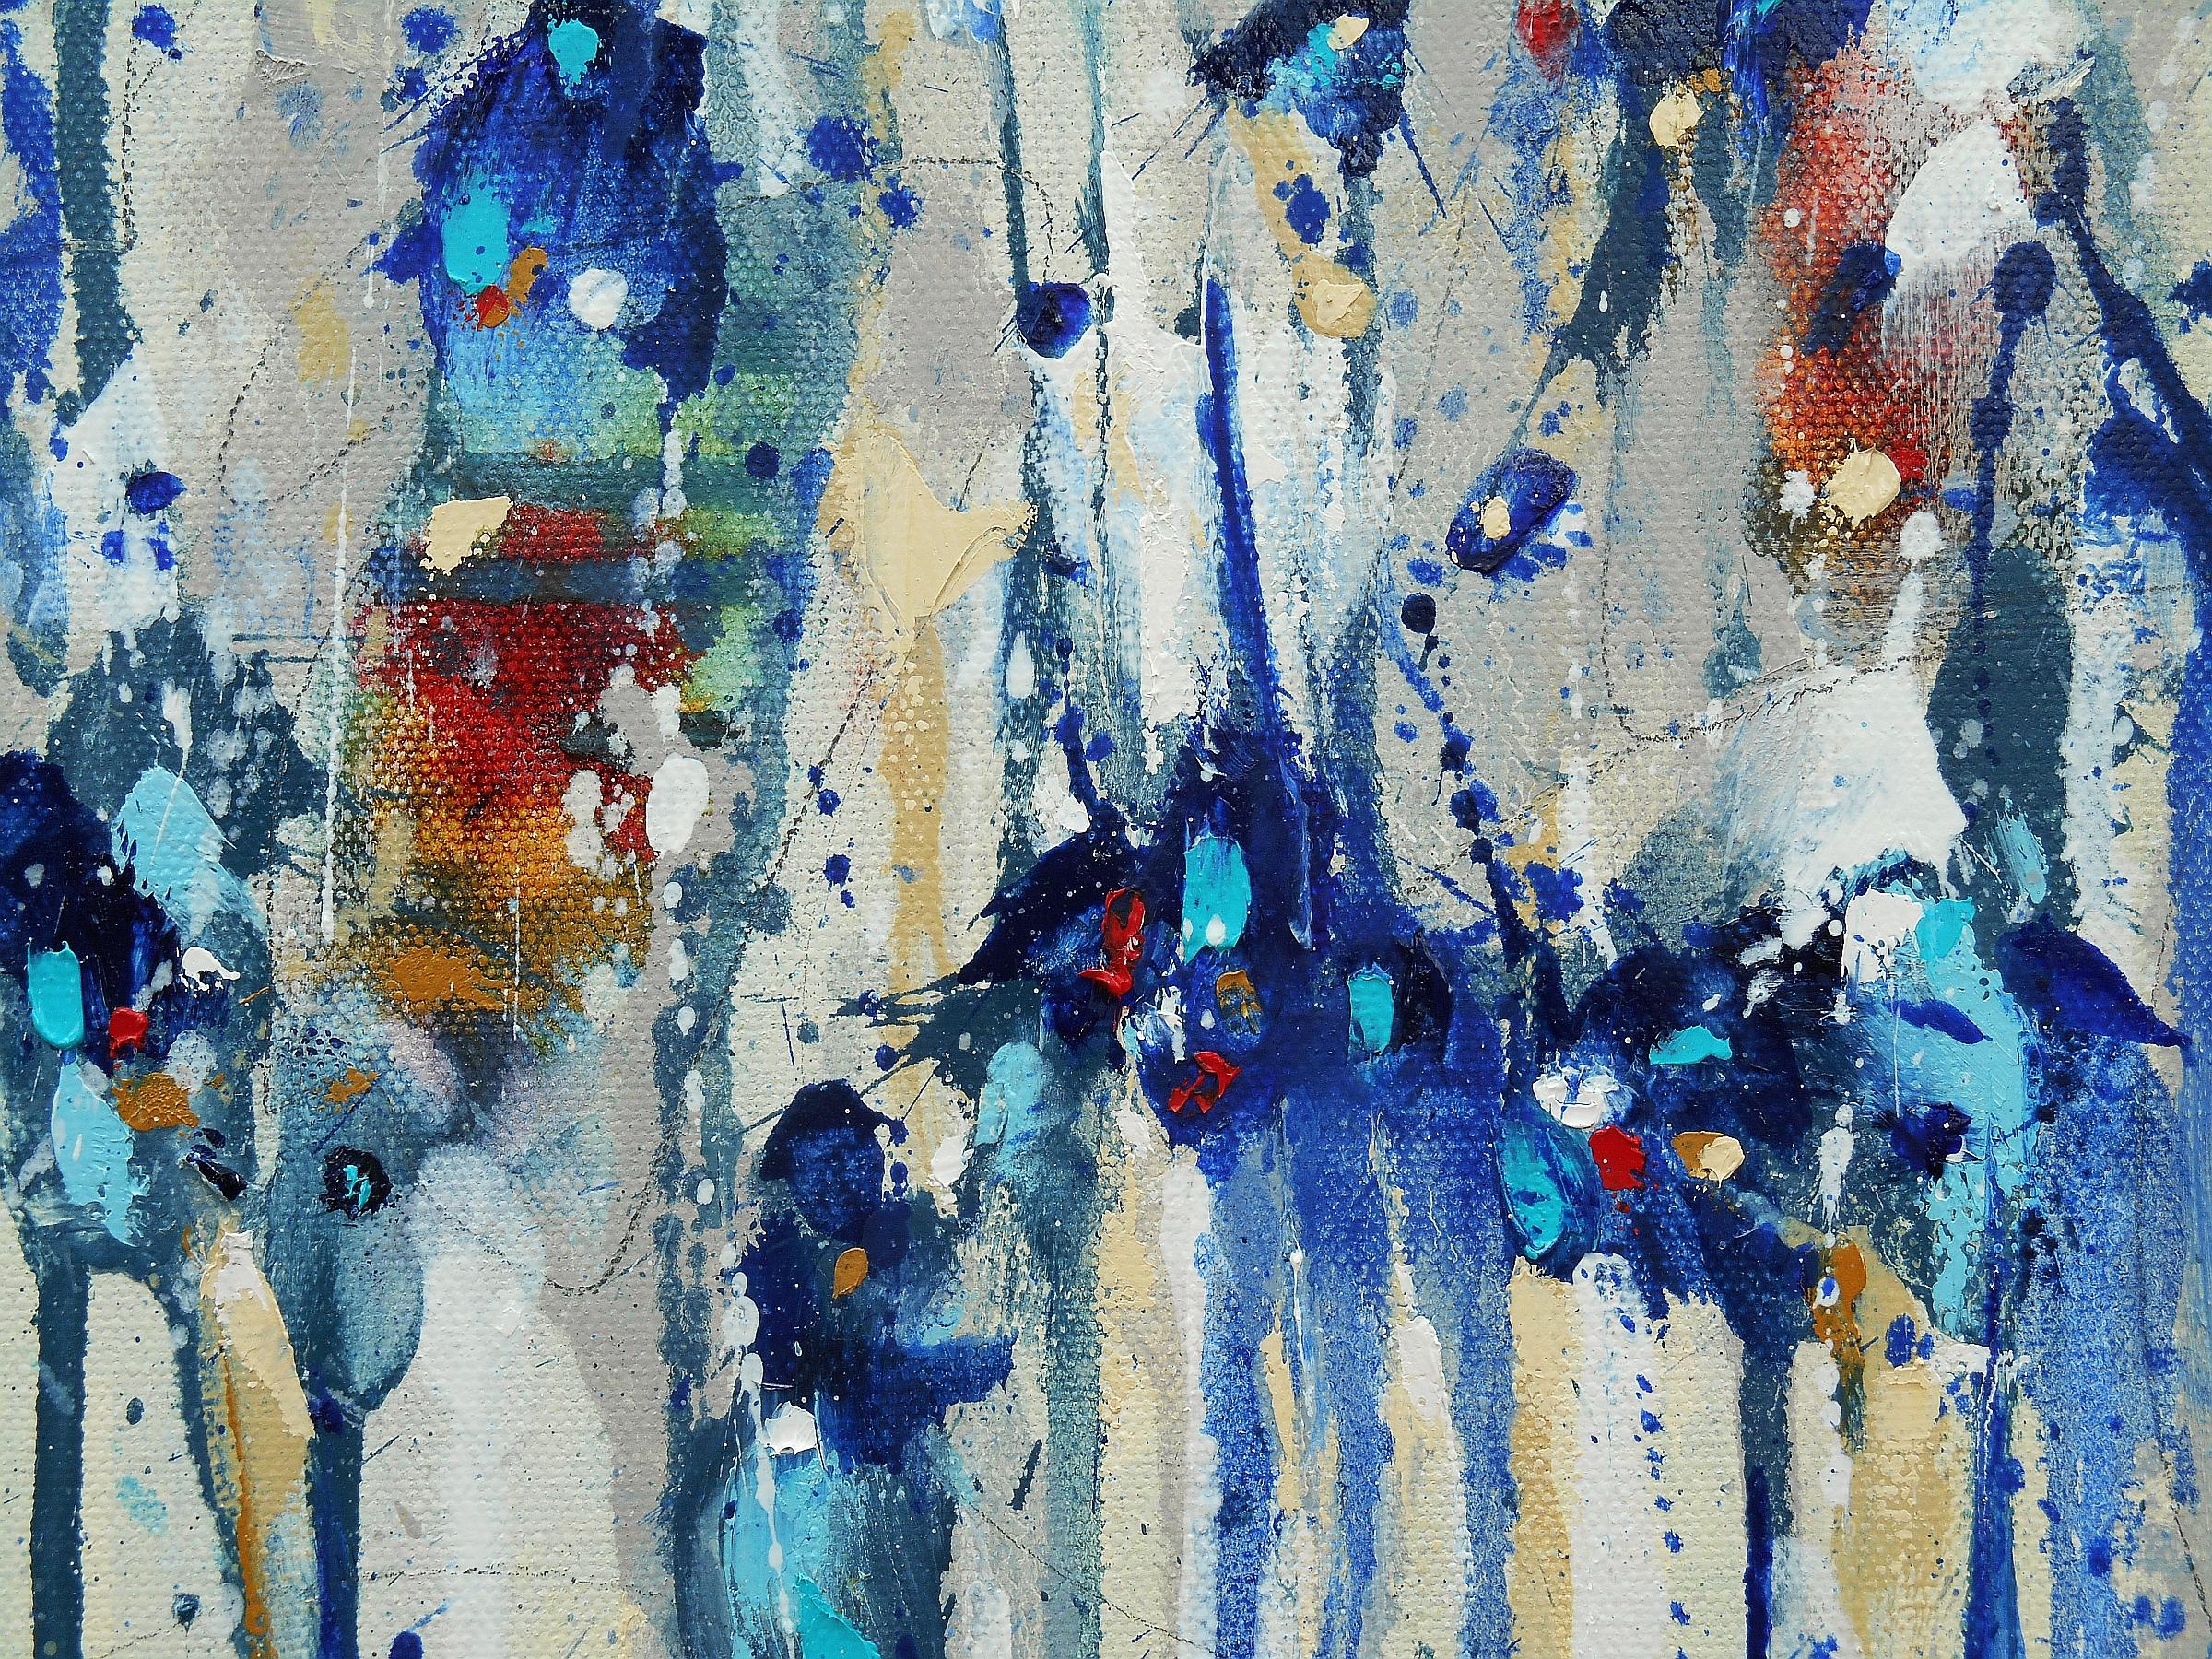 Spectacle of Fancy, Abstract Oil Painting - Blue Abstract Painting by Cynthia Ligeros